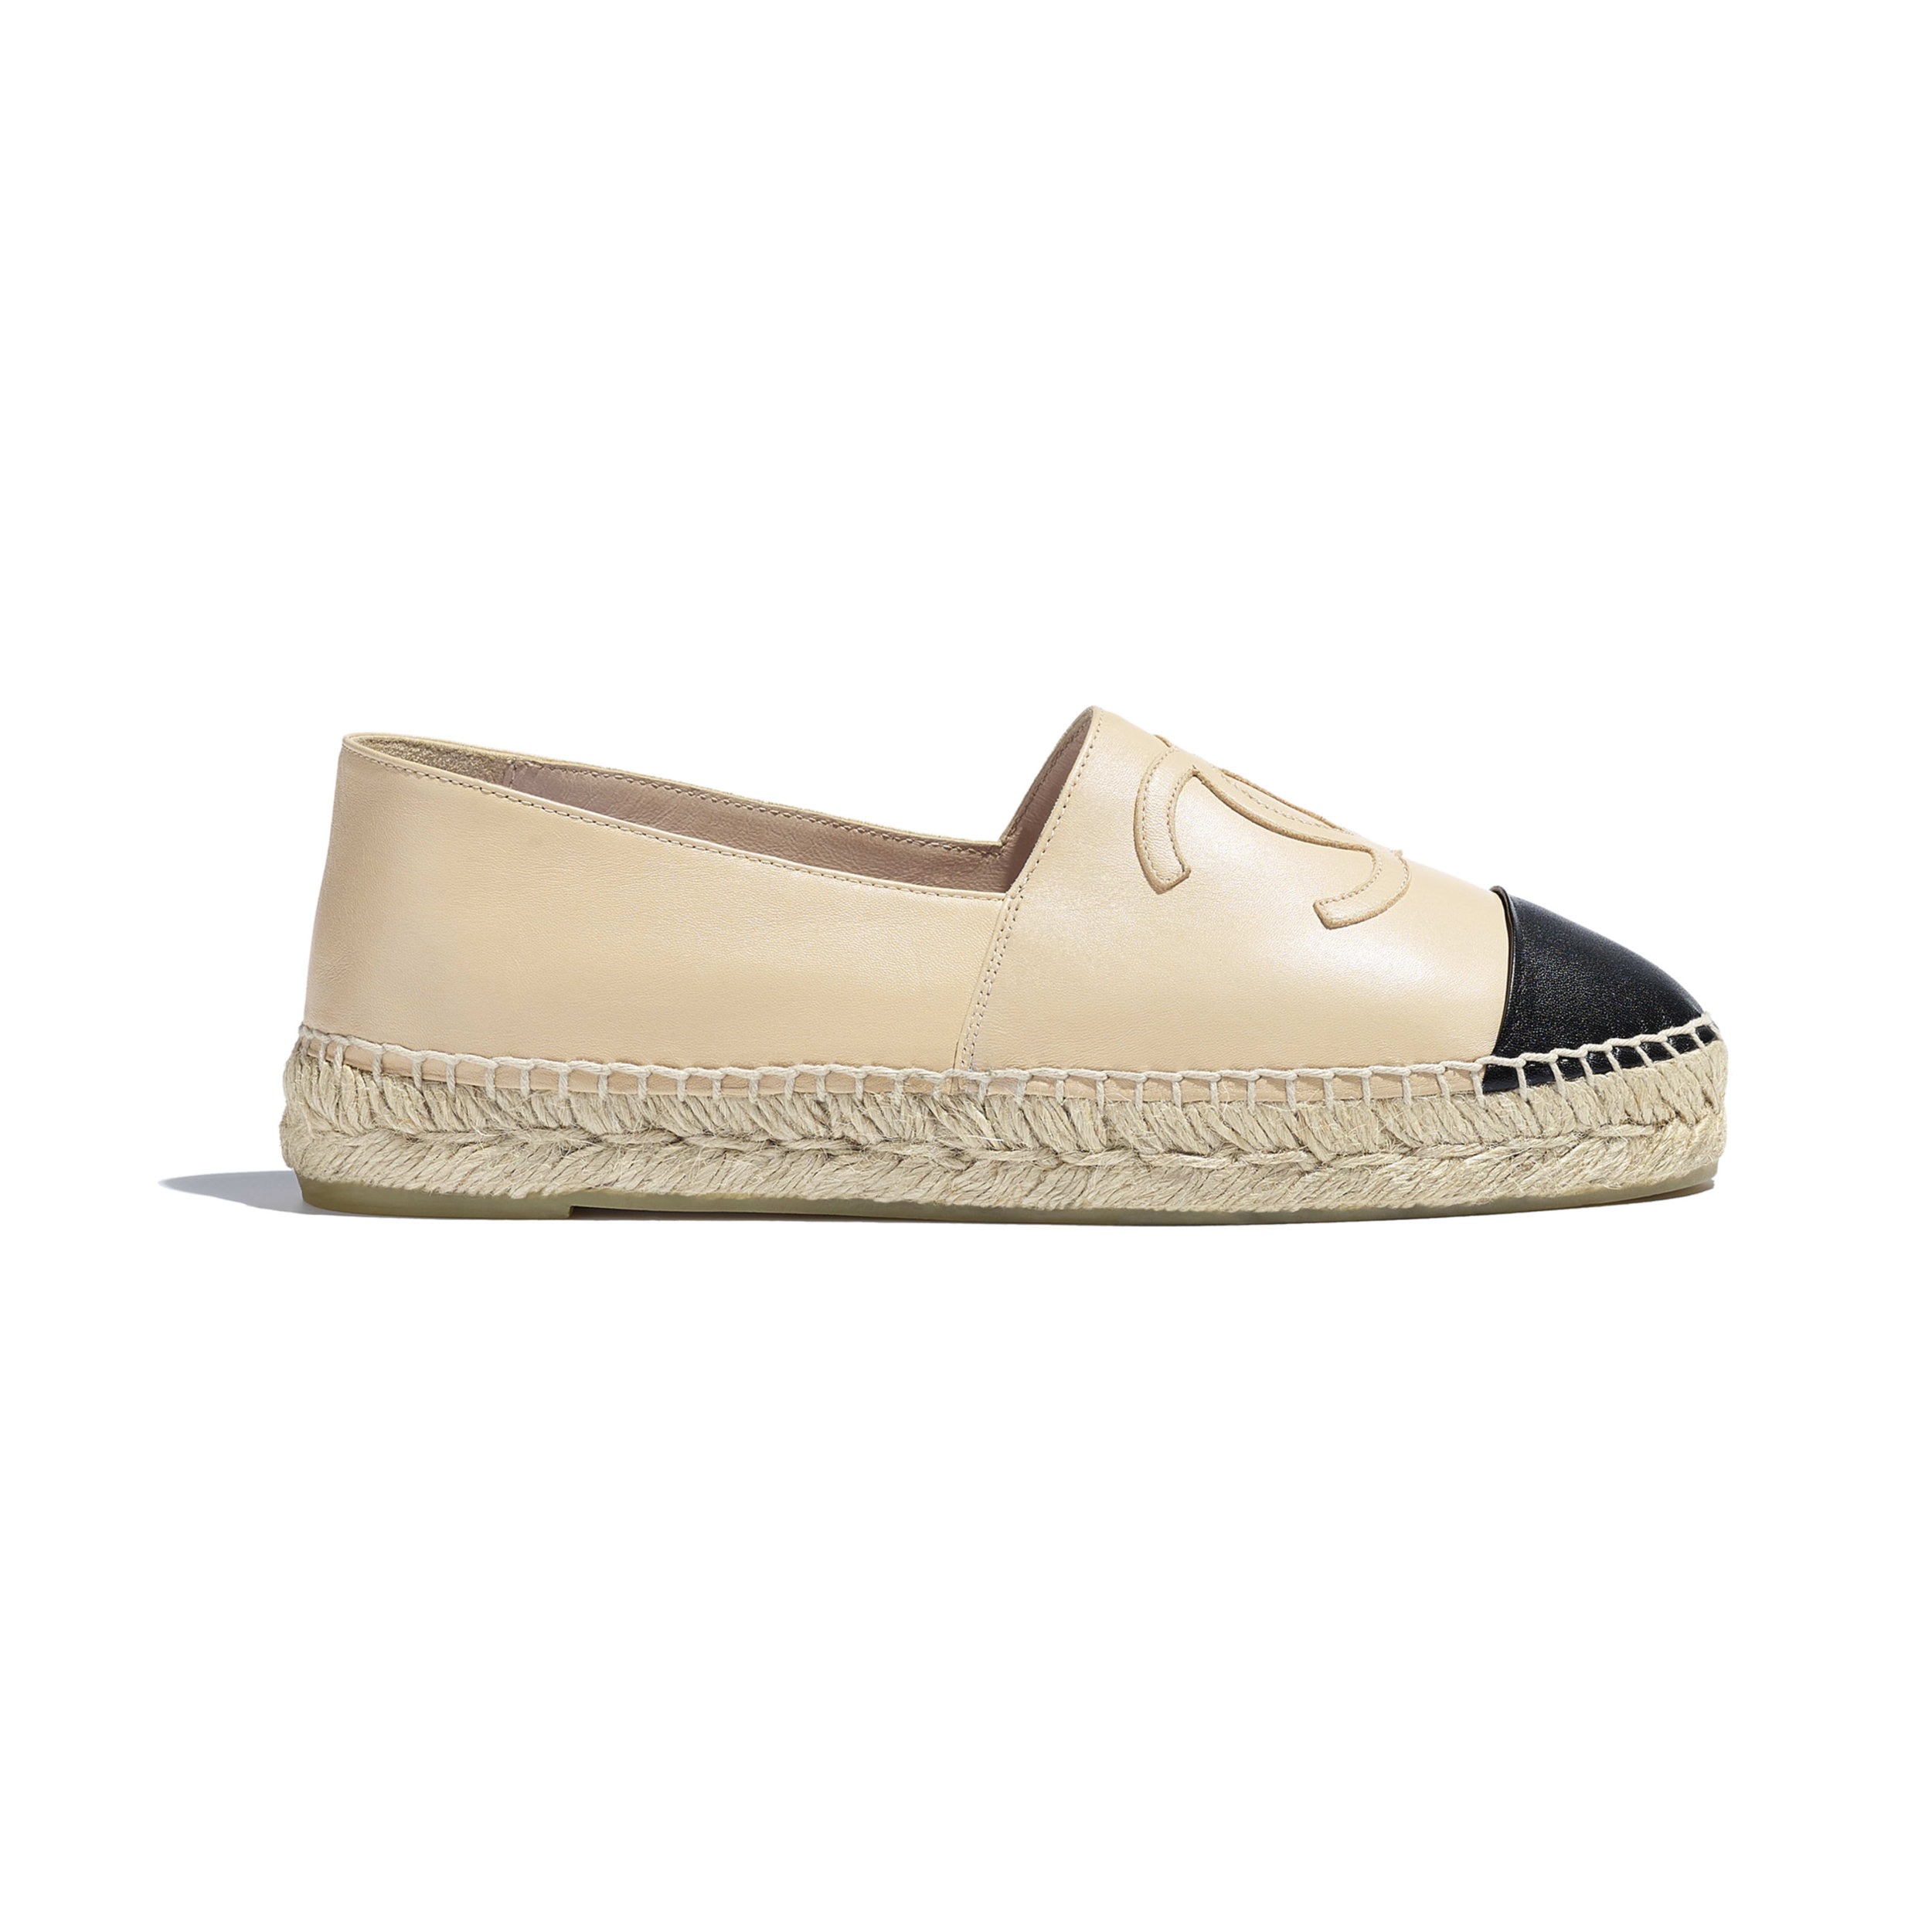 Chanel Lambskin Espadrilles in Beige and Black — UFO No More